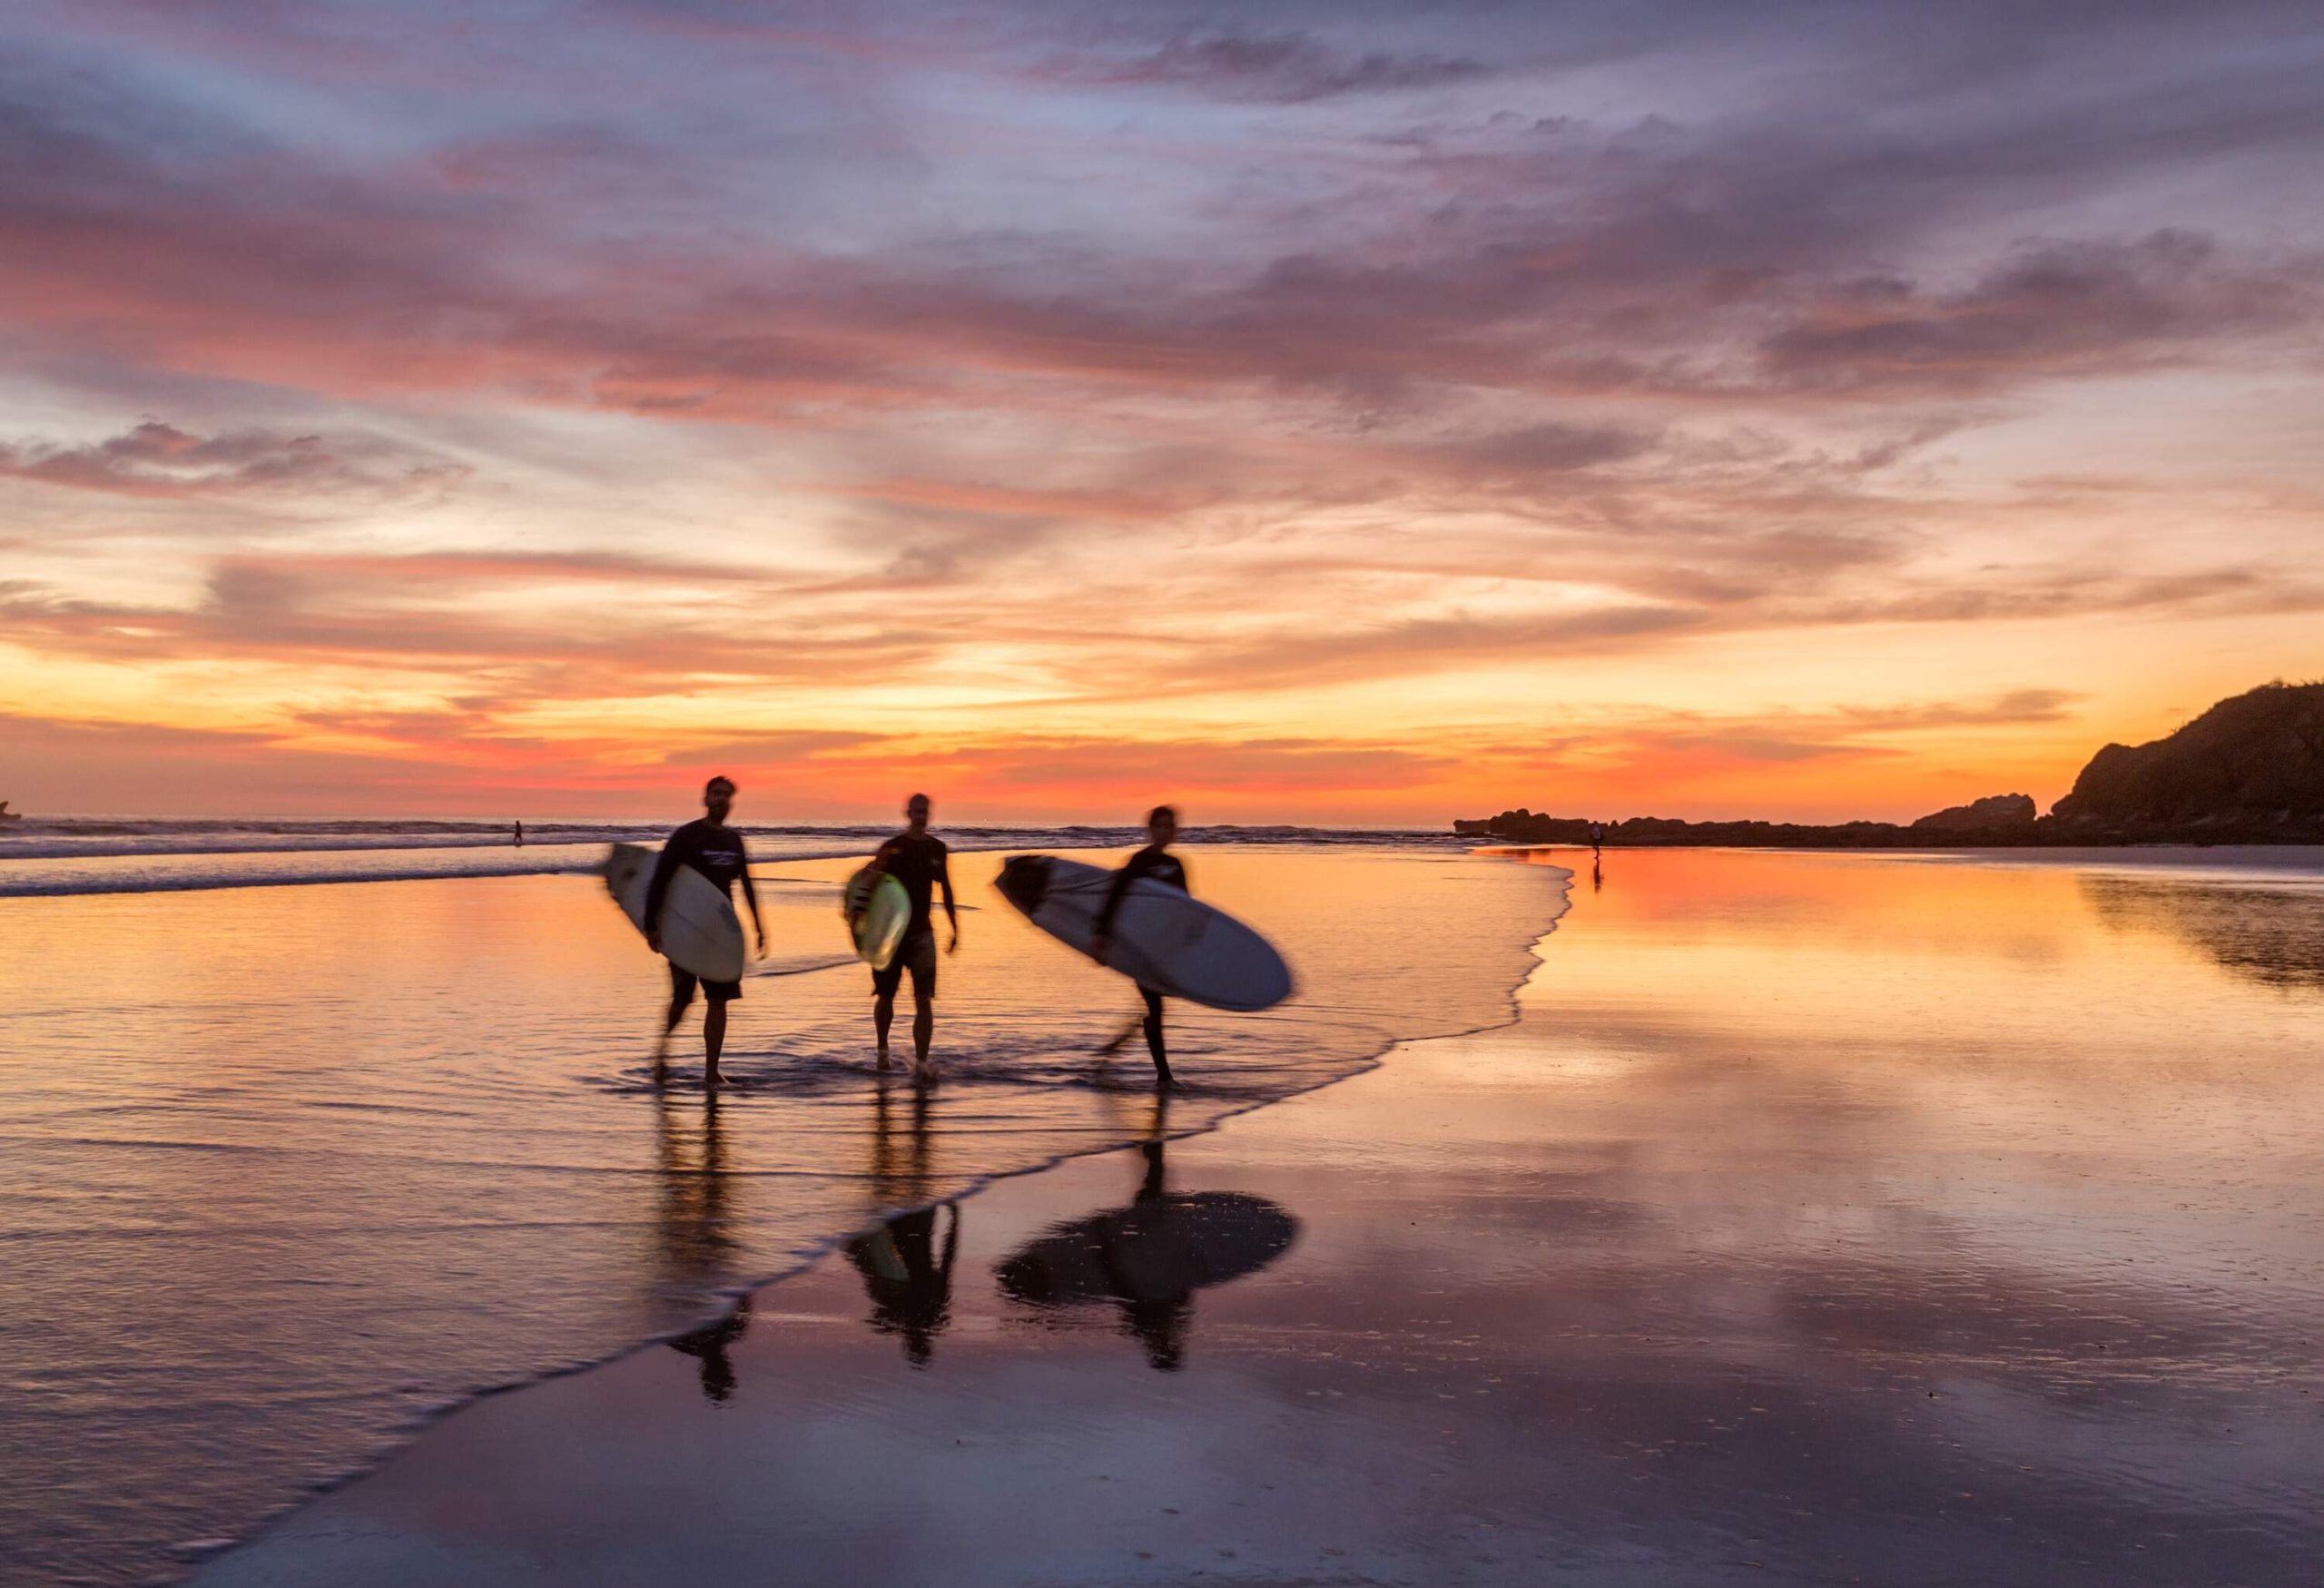 Three male surfers carrying their boards after surfing, walking towards the shore against the dramatic sky.